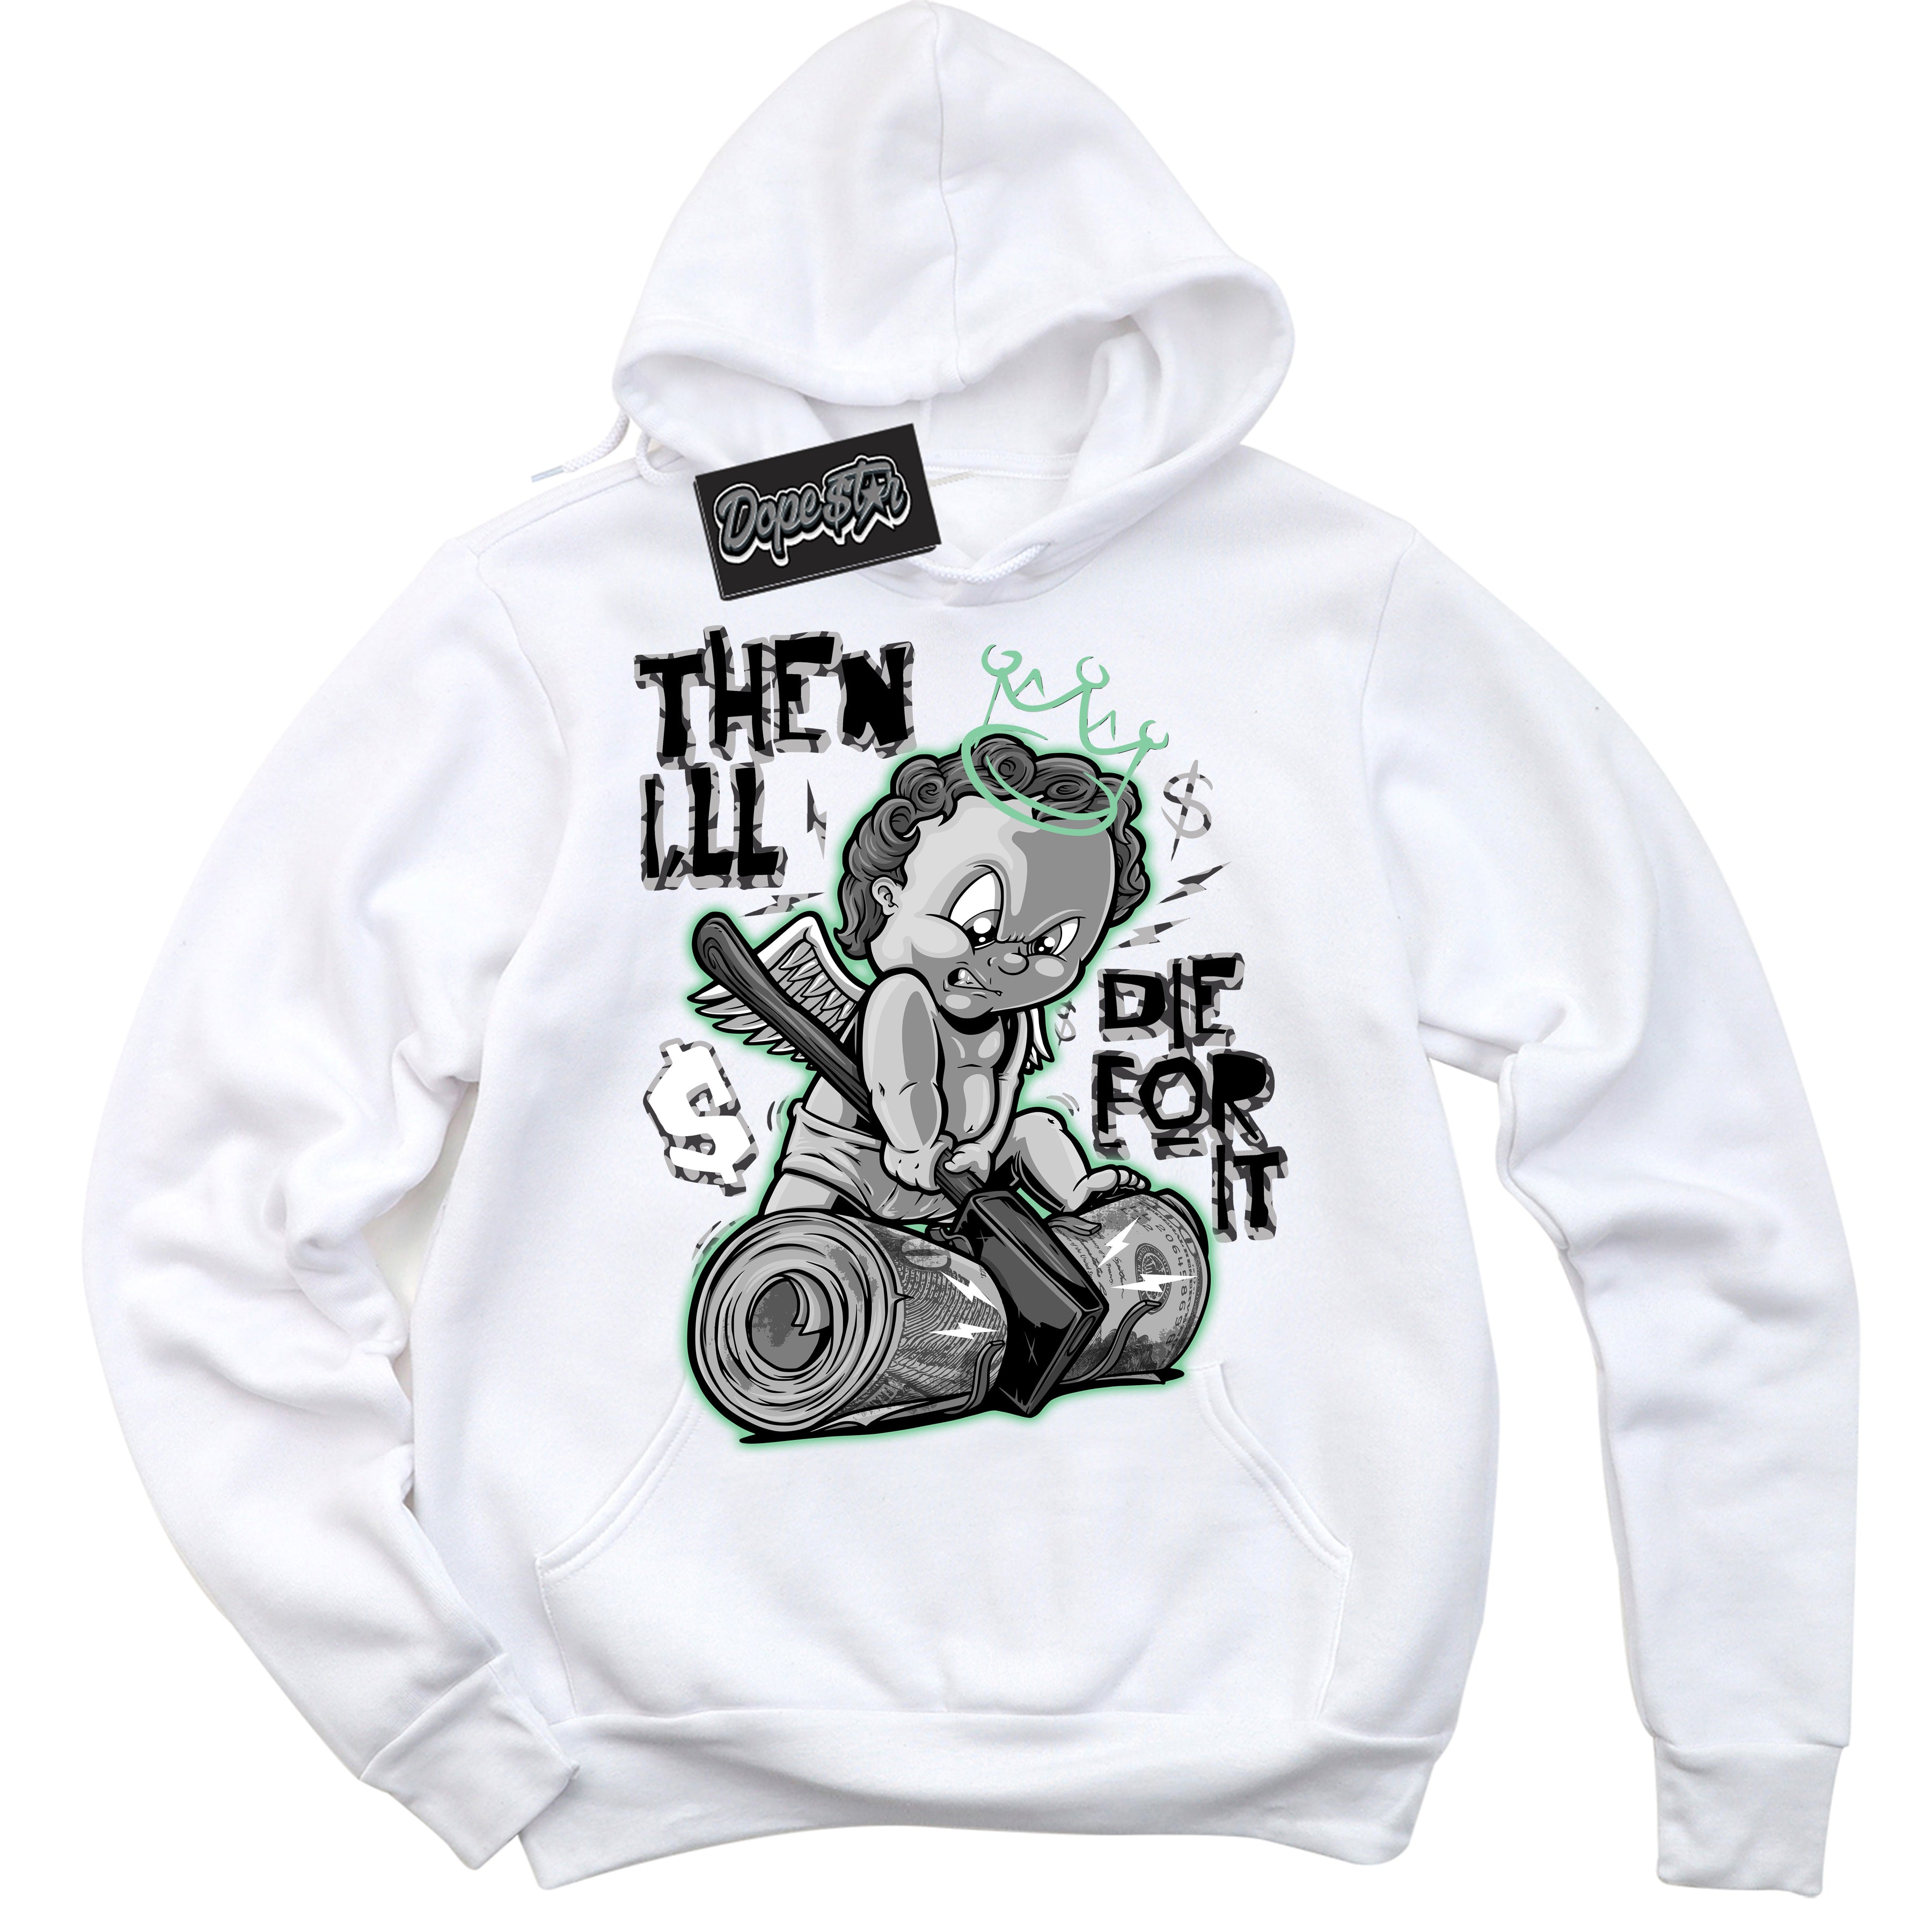 Cool White Graphic DopeStar Hoodie with “ Then I'll “ print, that perfectly matches Green Glow 3s sneakers